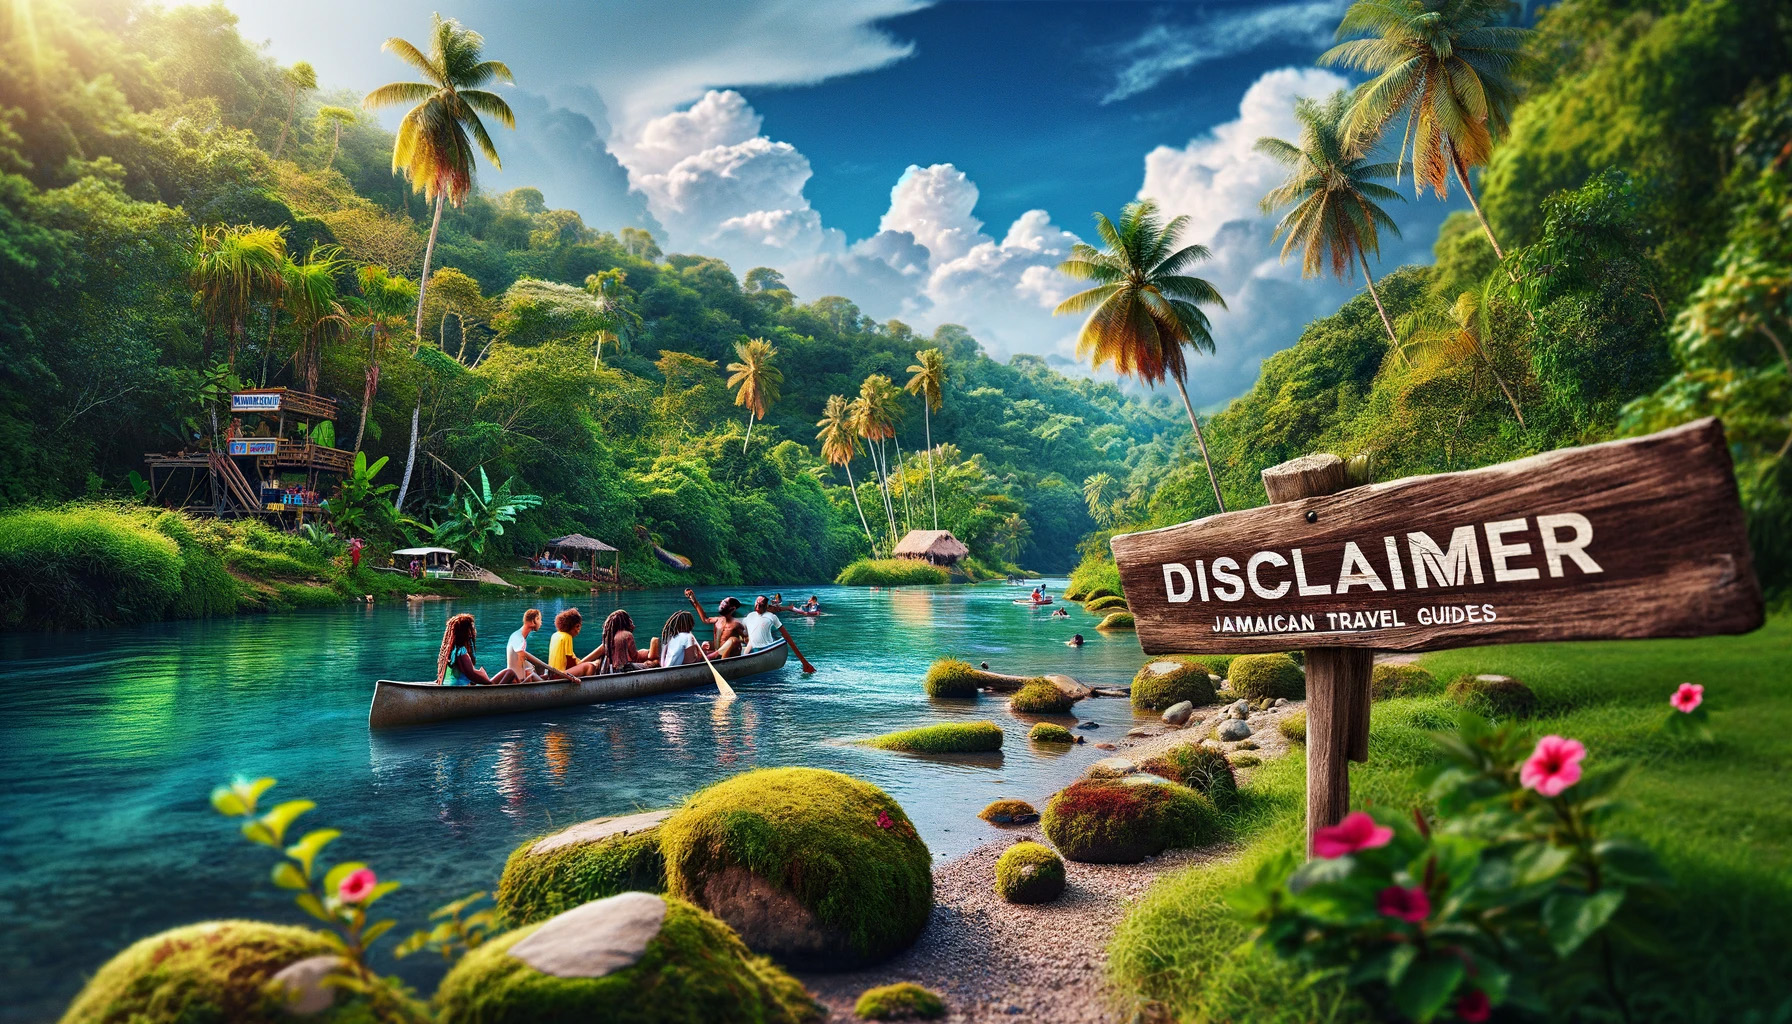 Disclaimer - Jamaican Travel Guides